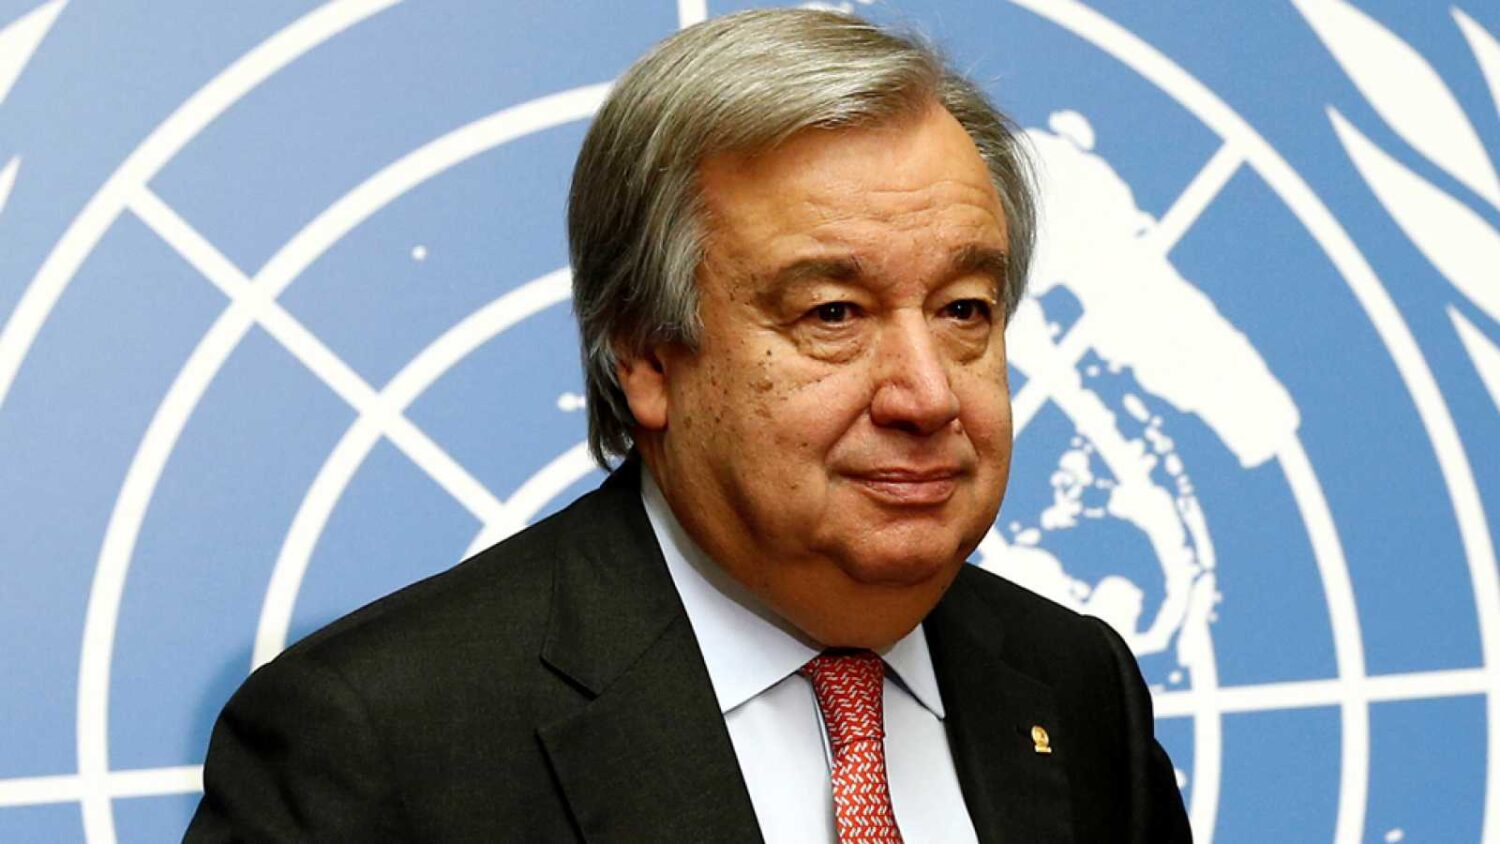 UN Chief Set To Run For Second Term